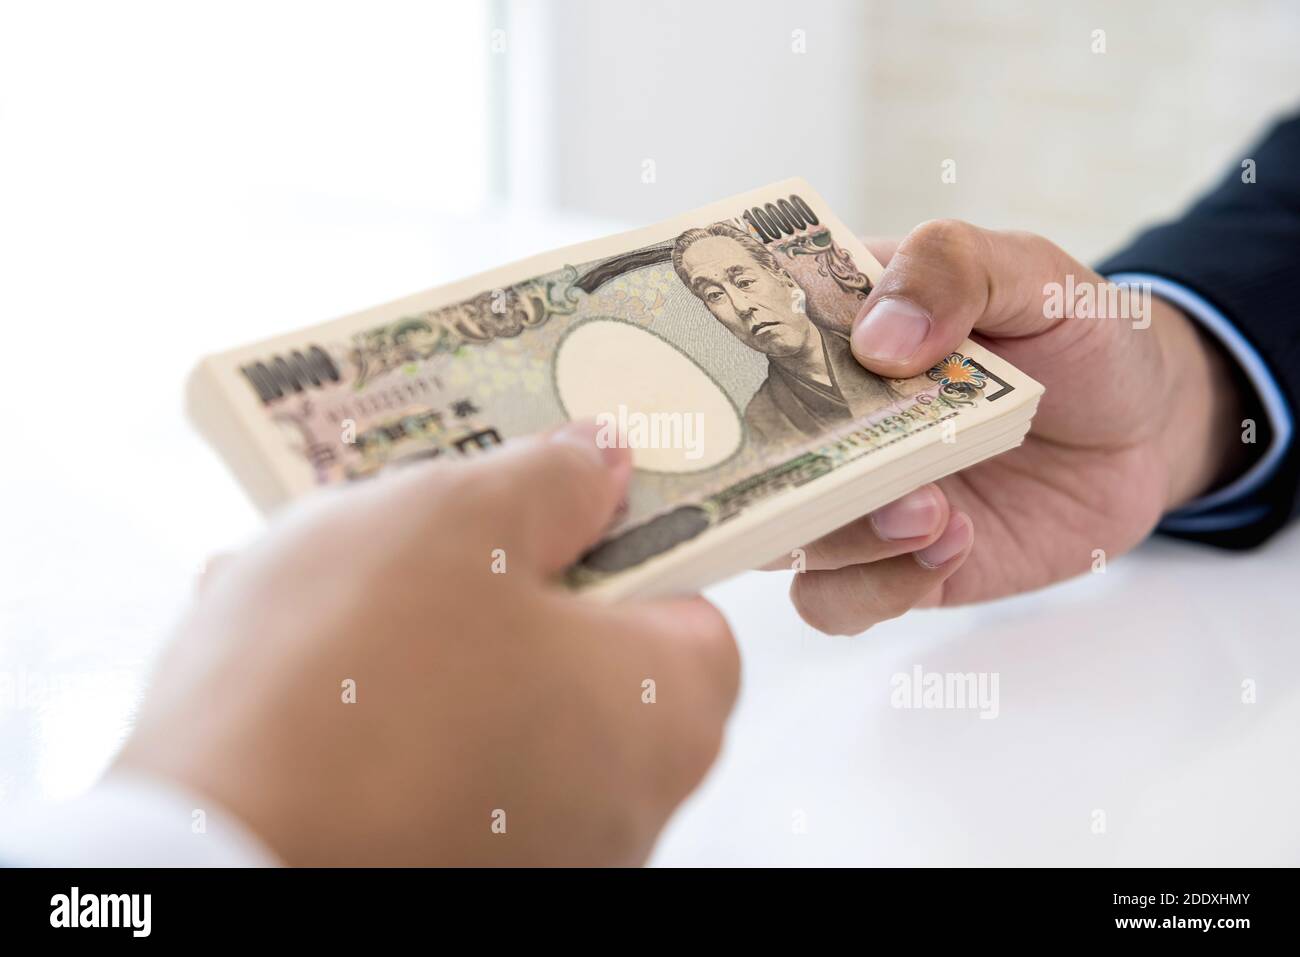 Businessman giving money in the form of Japanese Yen currency to his partner for service rendered - financial, loan and cash payment concepts Stock Photo